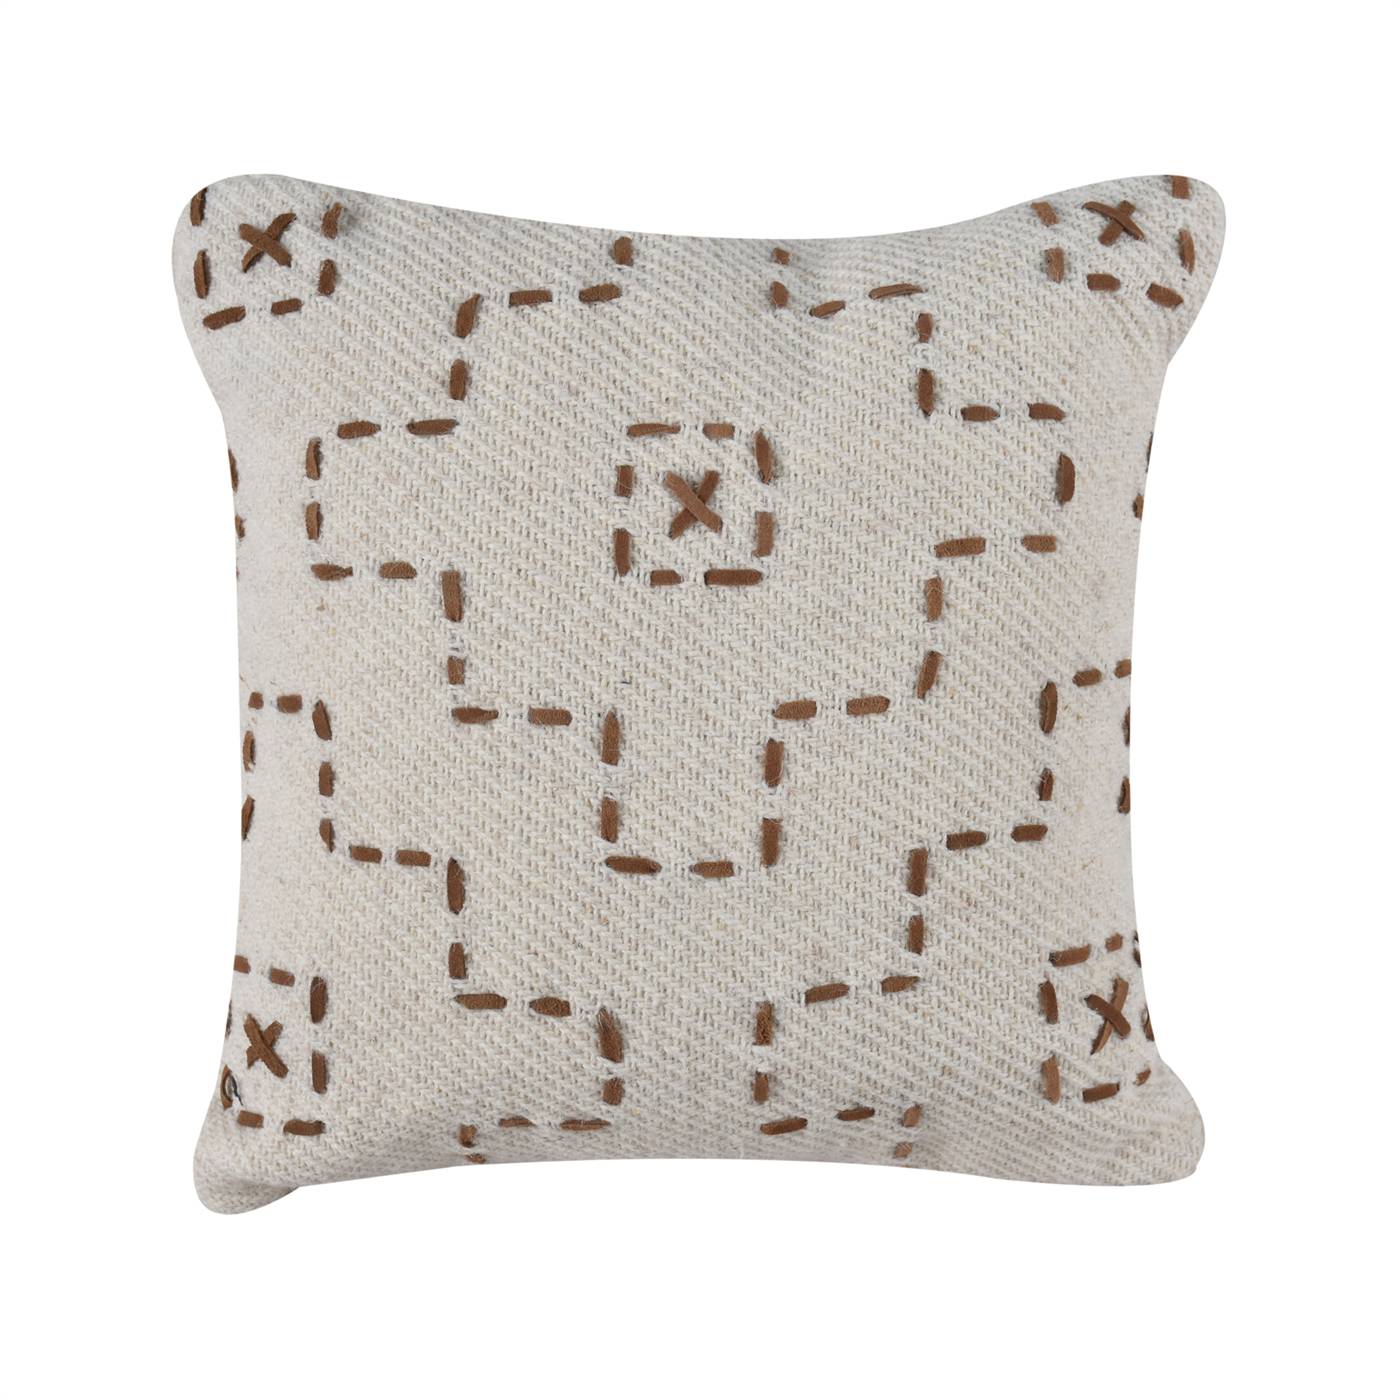 Leona Cushion, 45x45 cm, Natural White, Brown, Wool, Leather, Hand Made, Hm Stitching, Flat Weave